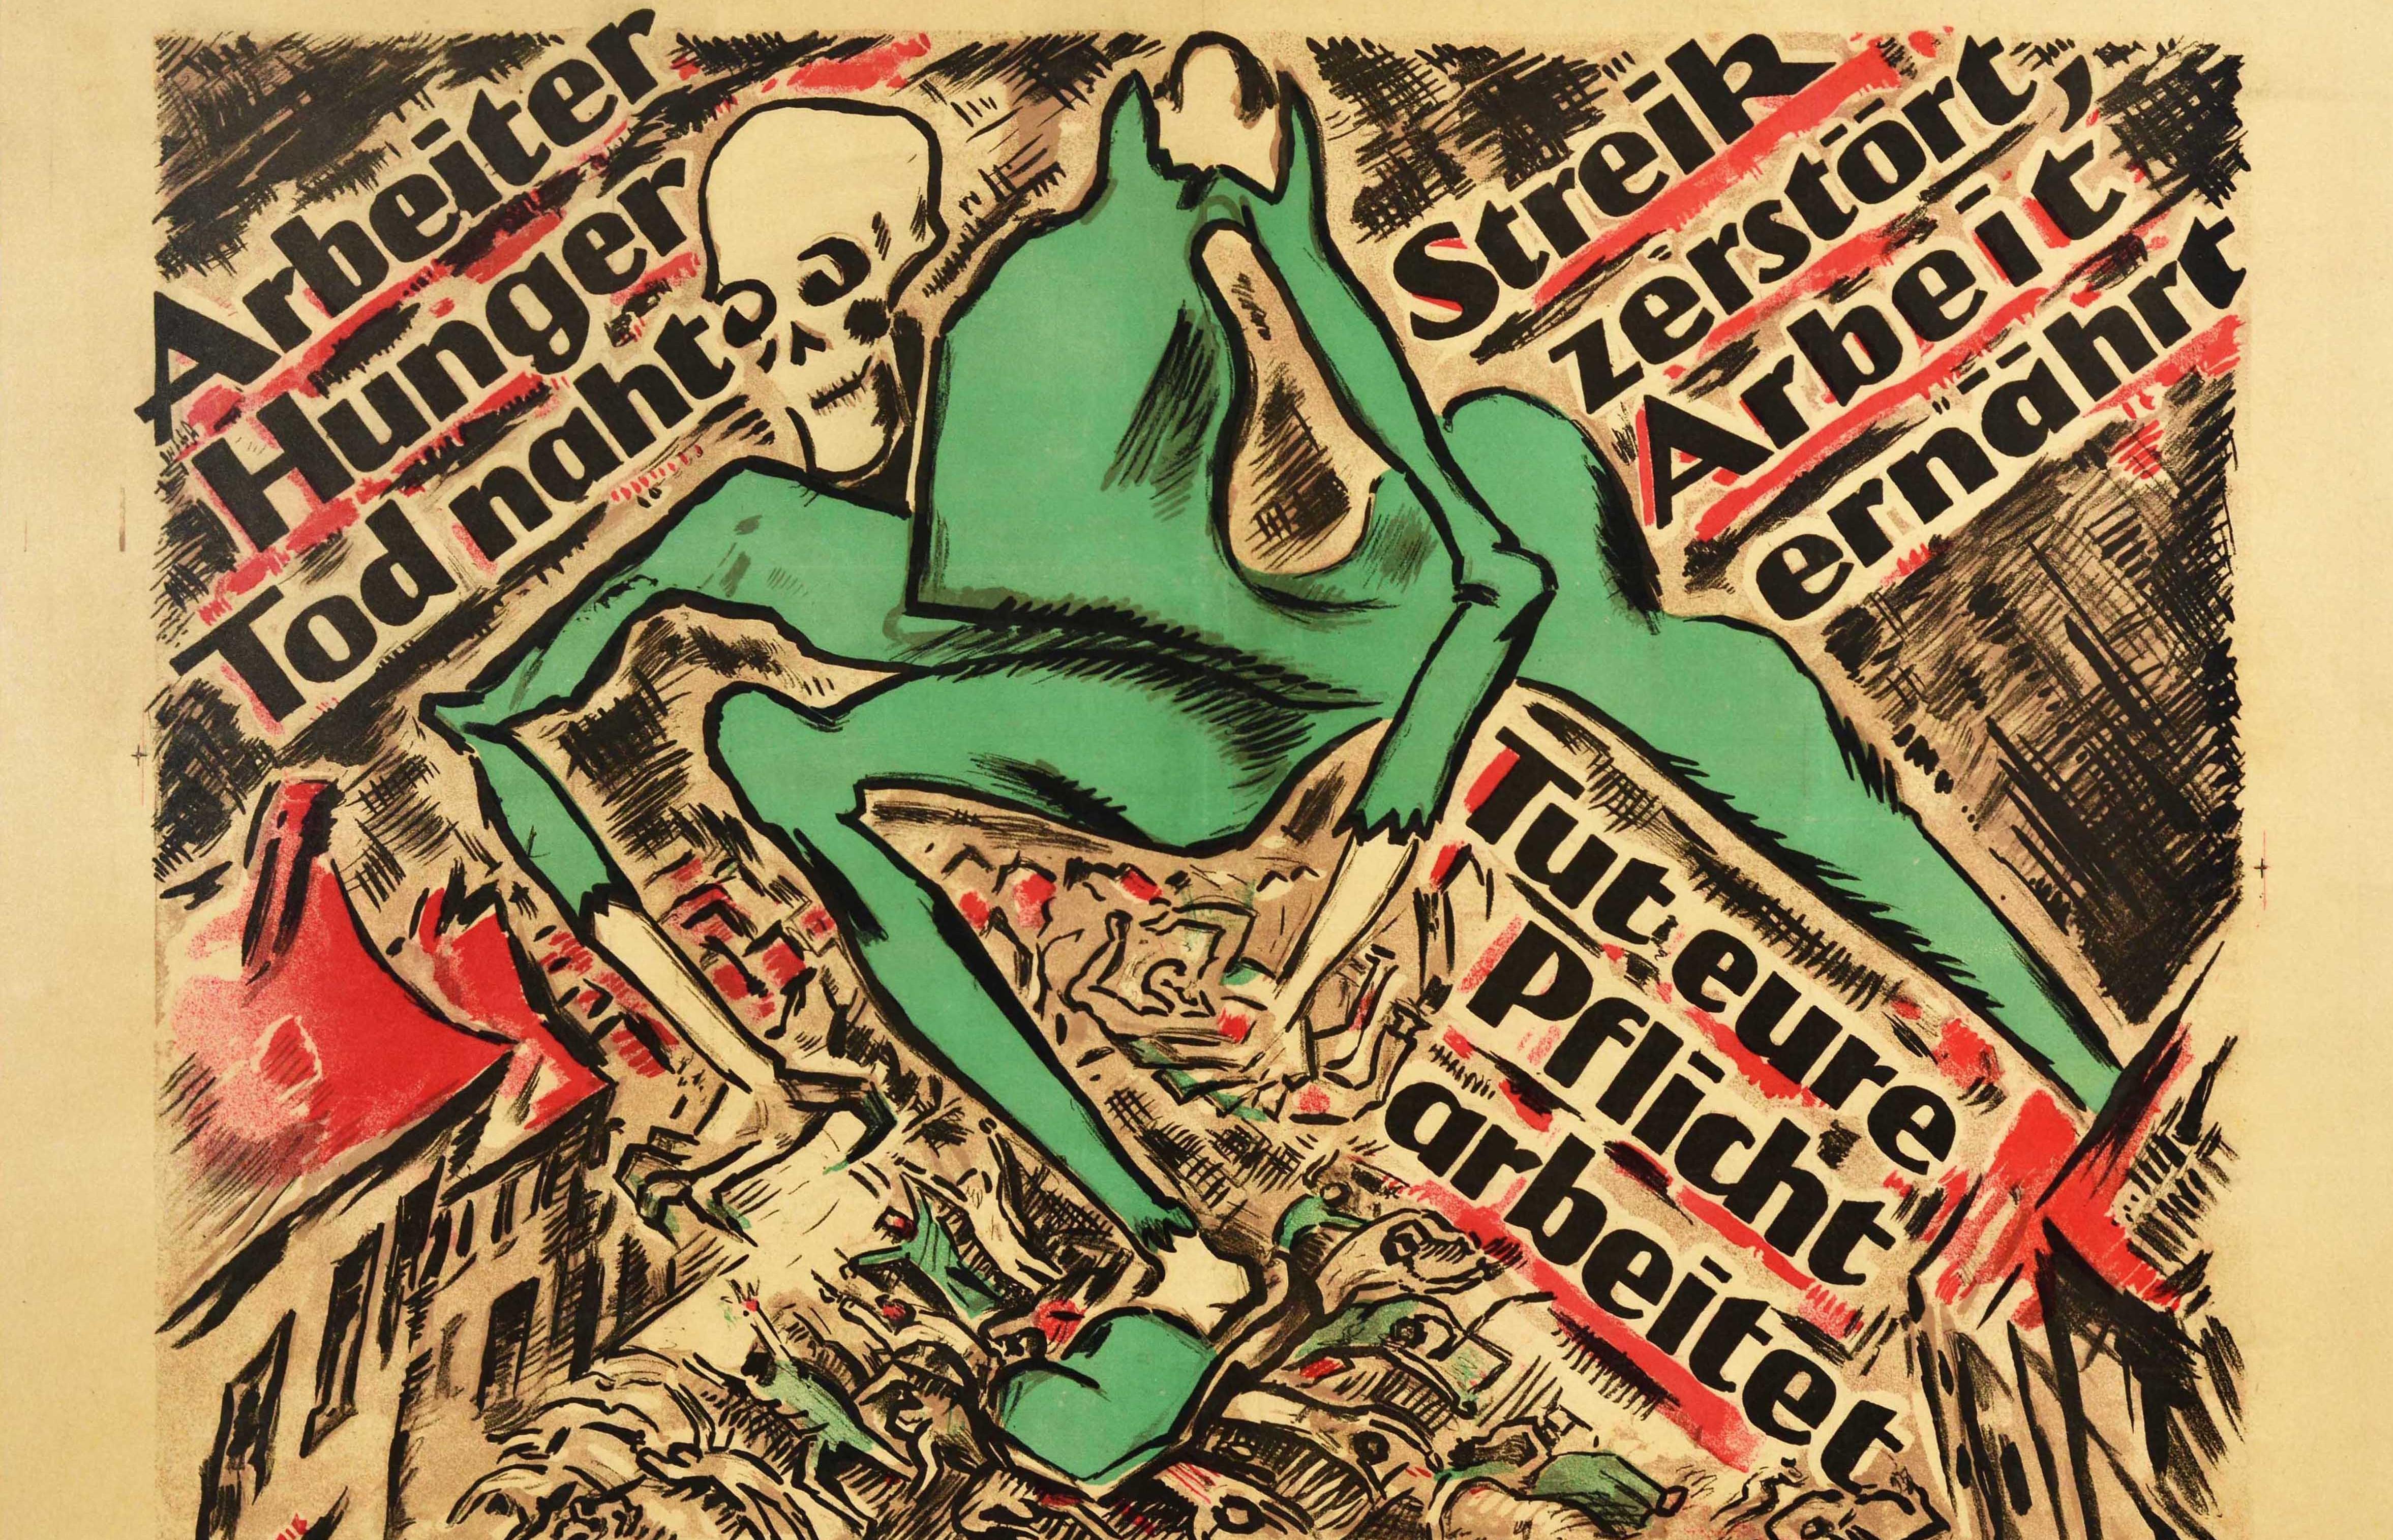 Original antique anti-Bolshevik propaganda poster featuring artwork by the German designer Heinz Fuchs (1886-1961) depicting a skeleton figure in green stepping over people and houses with the diagonal text in bold black lettering - Workers